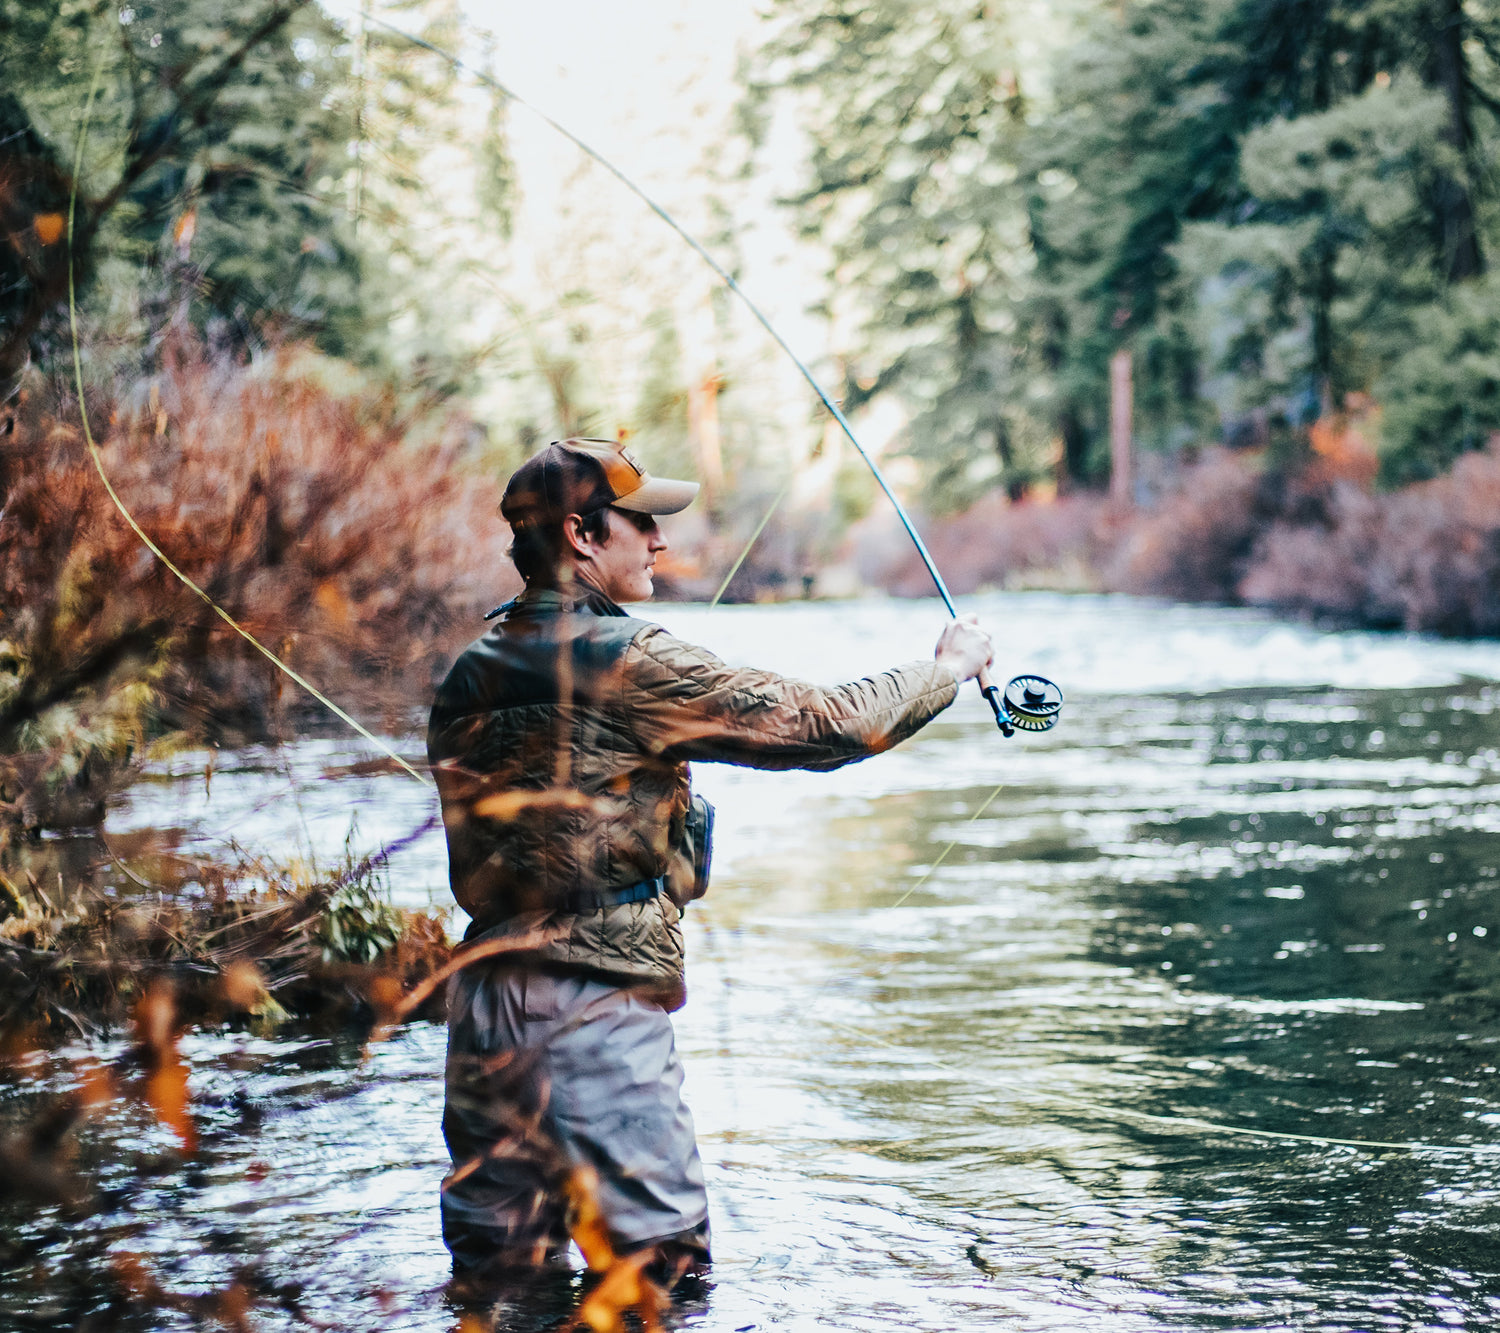 Image by Greysen Johnson on UnSplash - Man fishing in a river